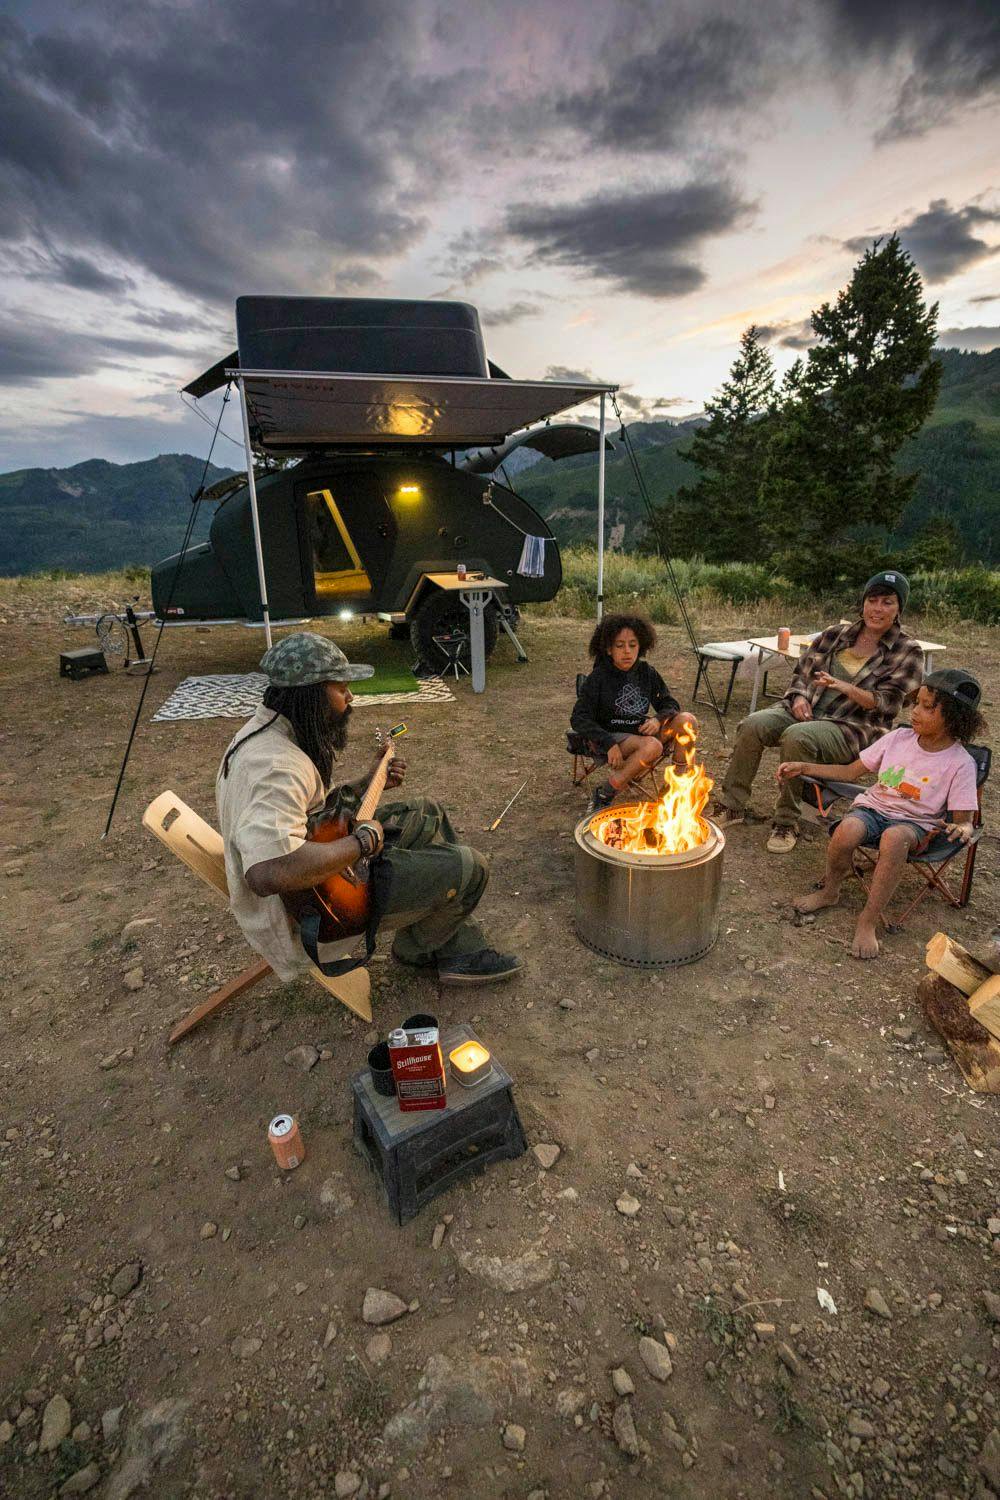 A family enjoying s'mores and music around a fire in front of their teardrop trailer.